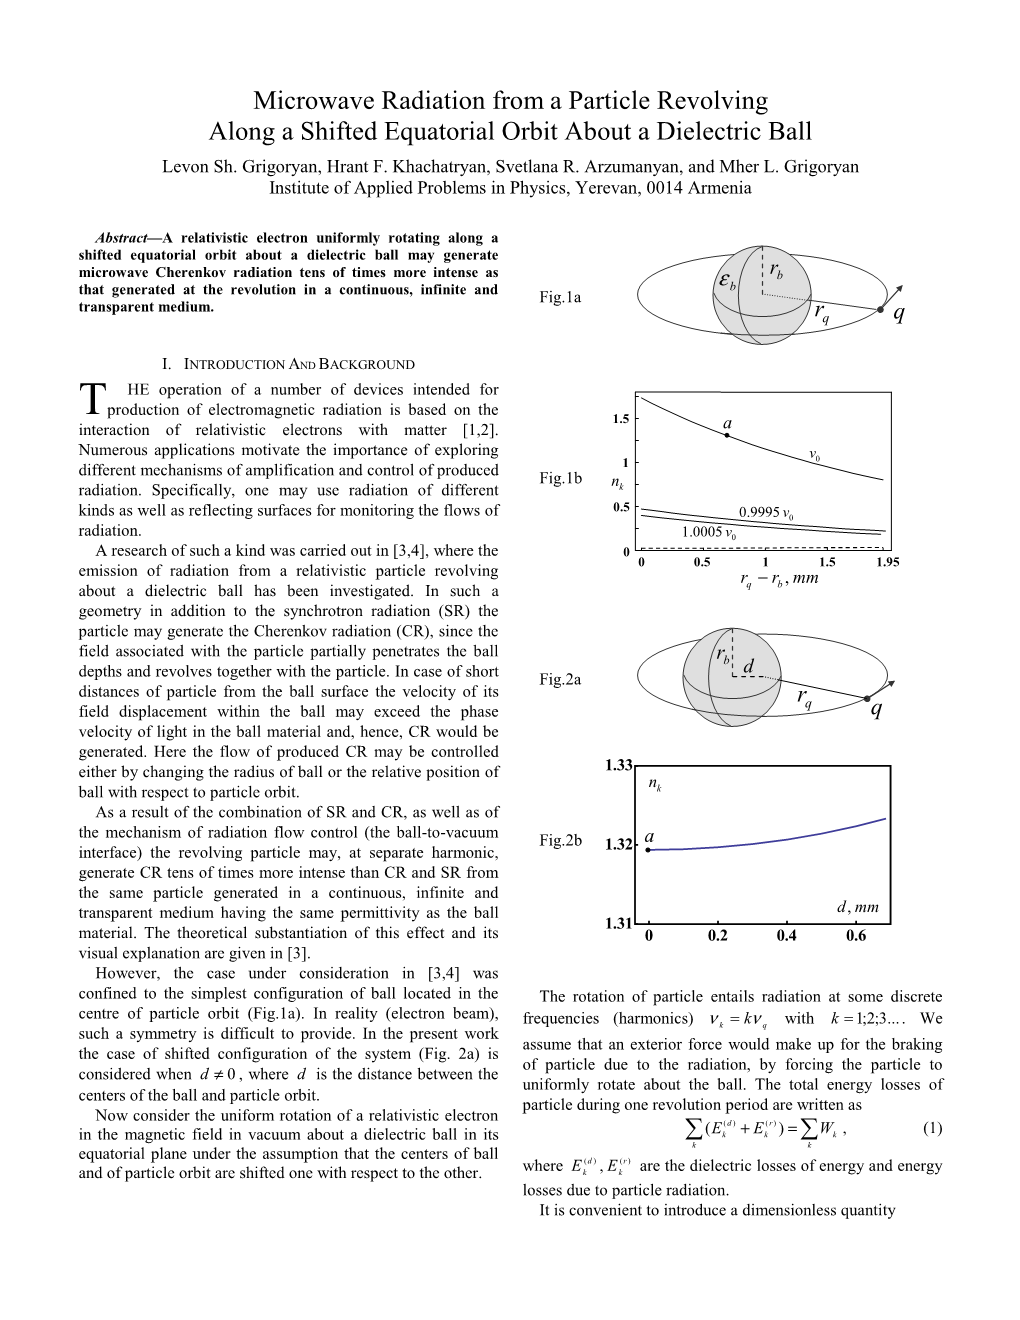 Microwave Radiation from a Particle Revolving Along a Shifted Equatorial Orbit About a Dielectric Ball Levon Sh